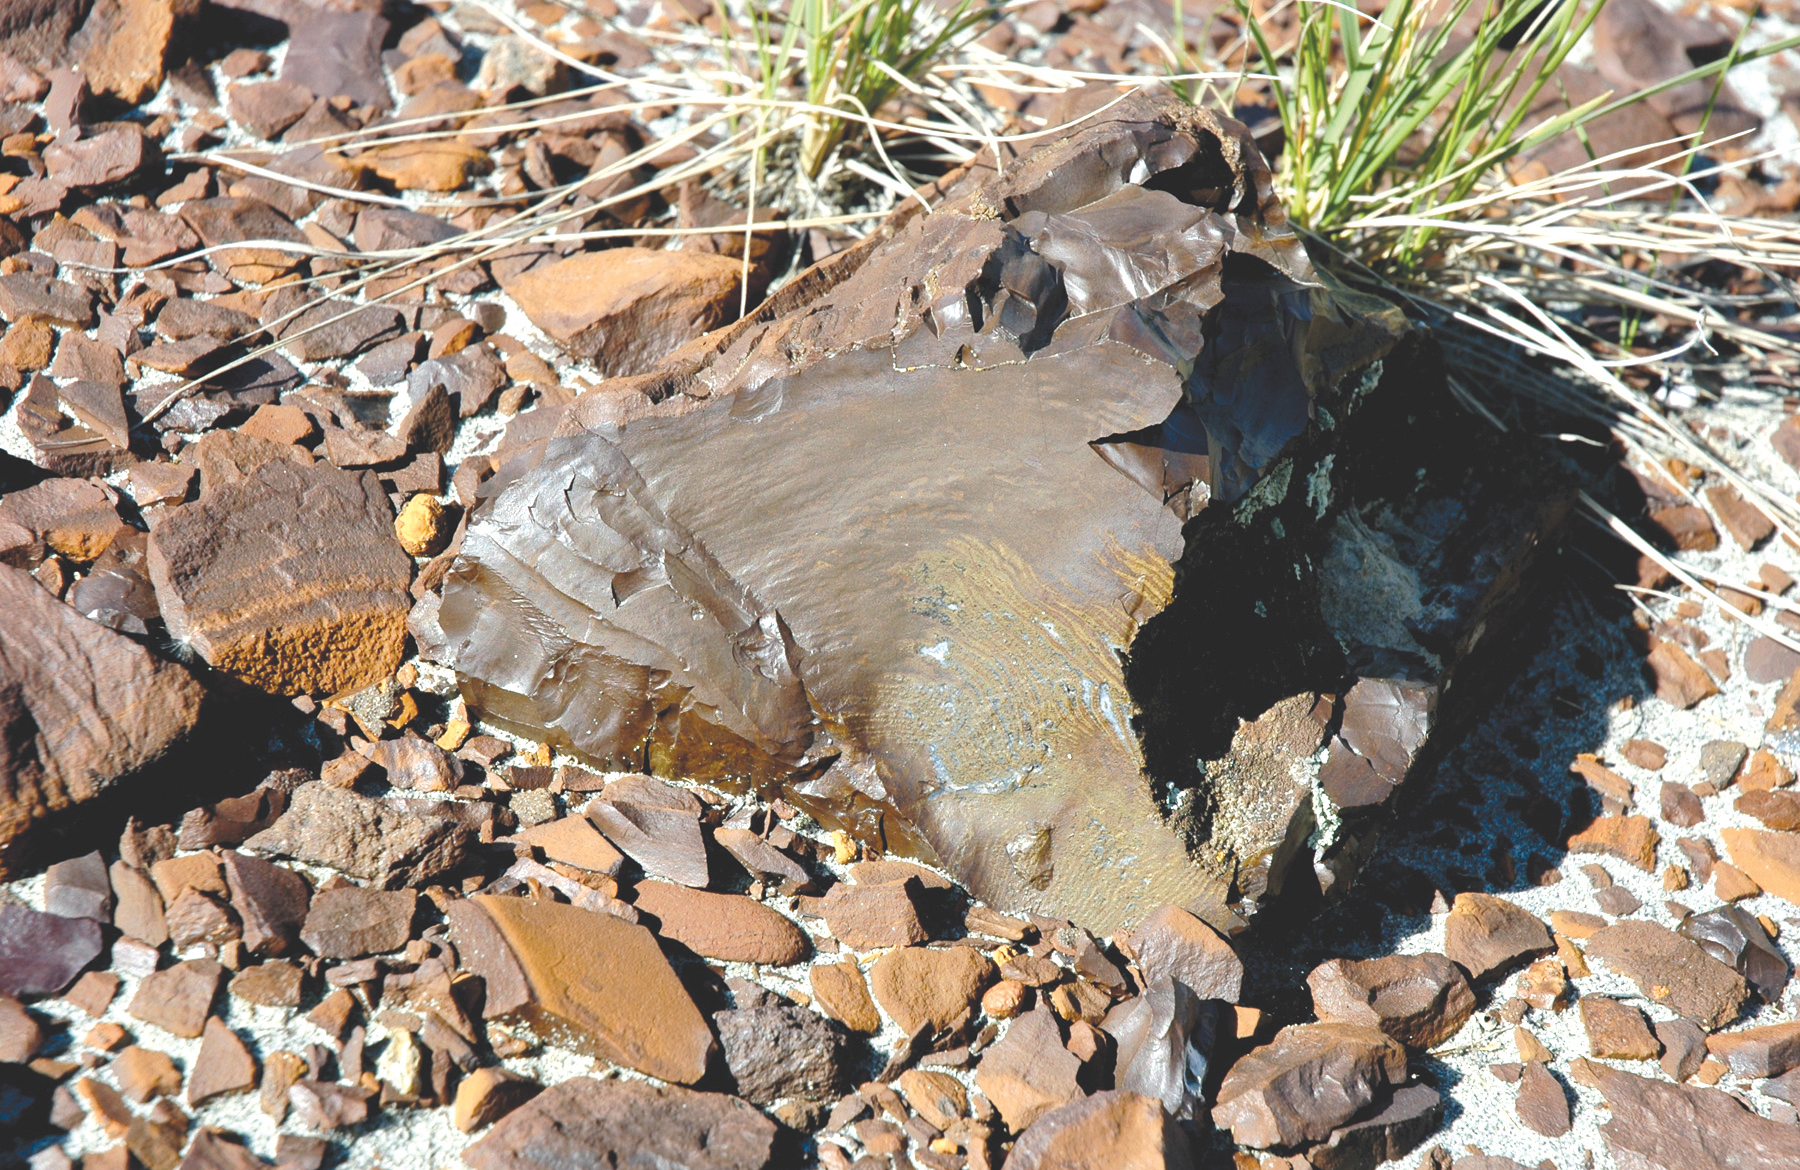 A big shiny brown rock on the ground centered among many smaller pieces of brown rock. A small tuft of grass is present beside the rock.